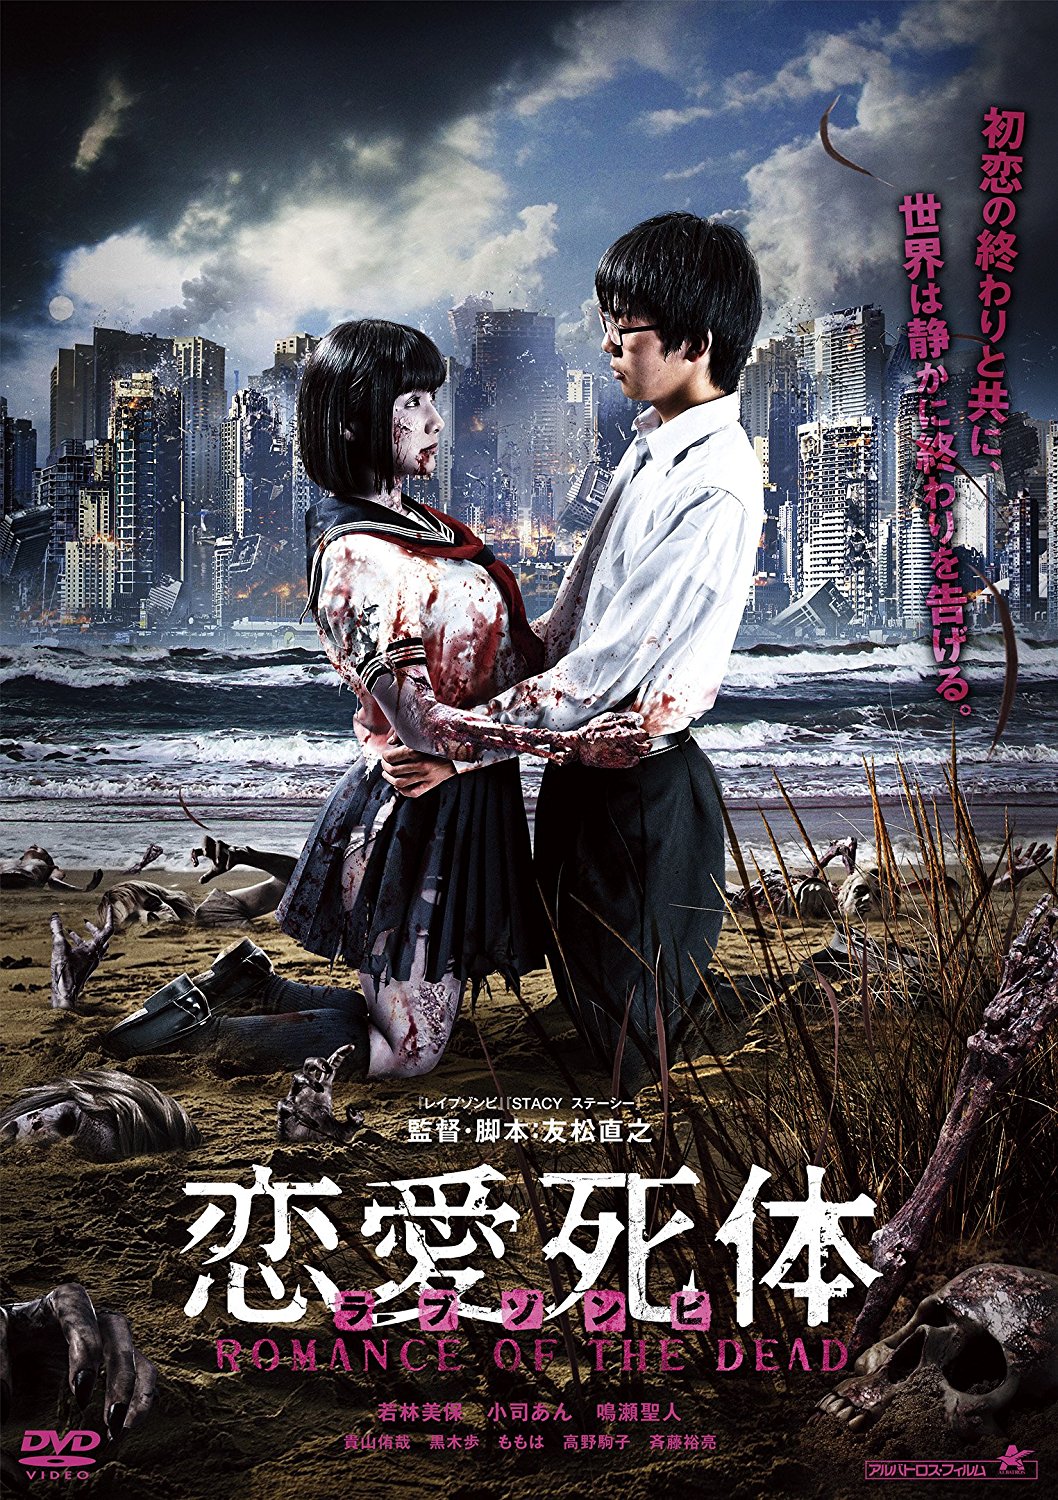 Love Zombie: Romance of the Dead (2015) with English Subtitles on DVD on DVD